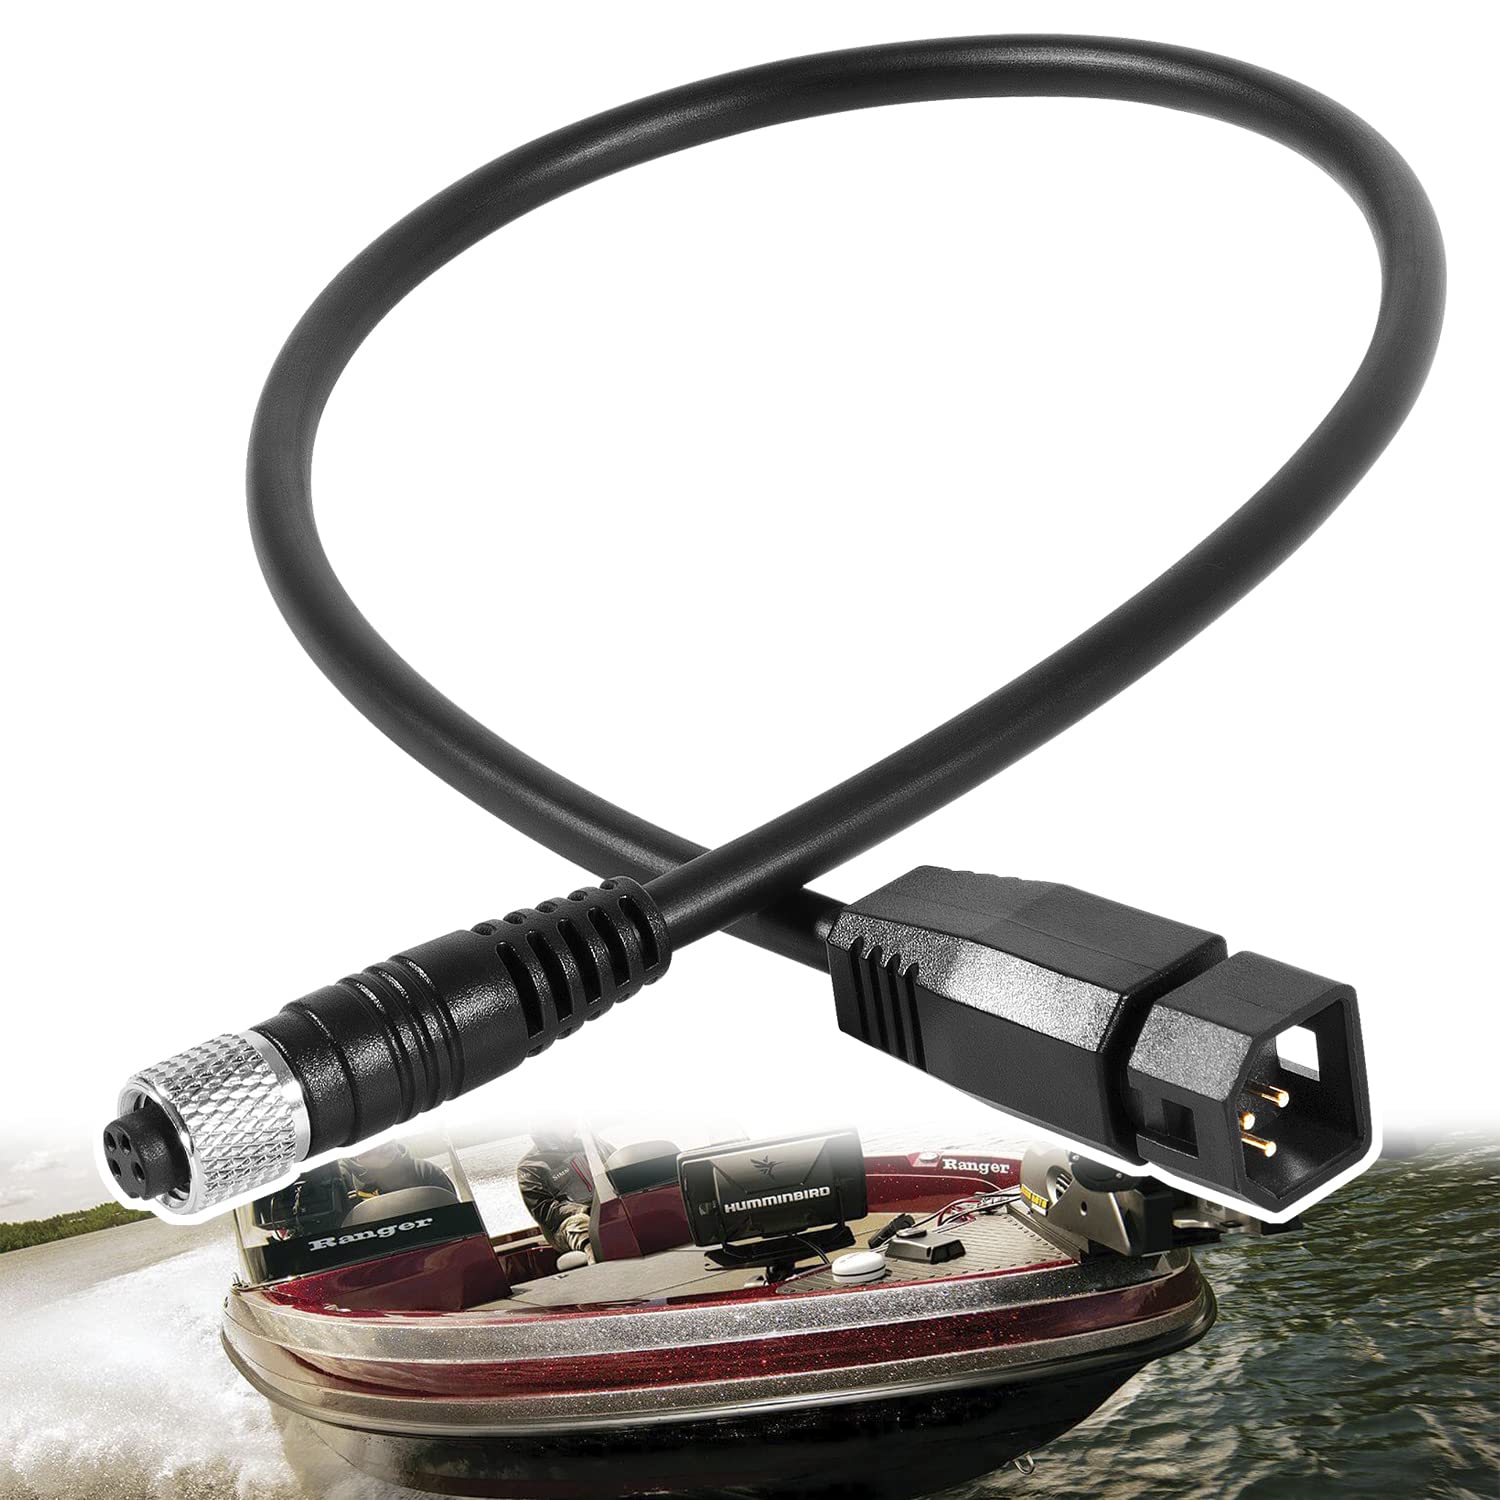 Deecaray 1852068 MKR-US2-8 HUM 7 PIN Transducer Adapter Cable with Instruction Manual，Suitable for Connection of Fish Finder to Universal Sonar 2 Transducer on Trolling Motor